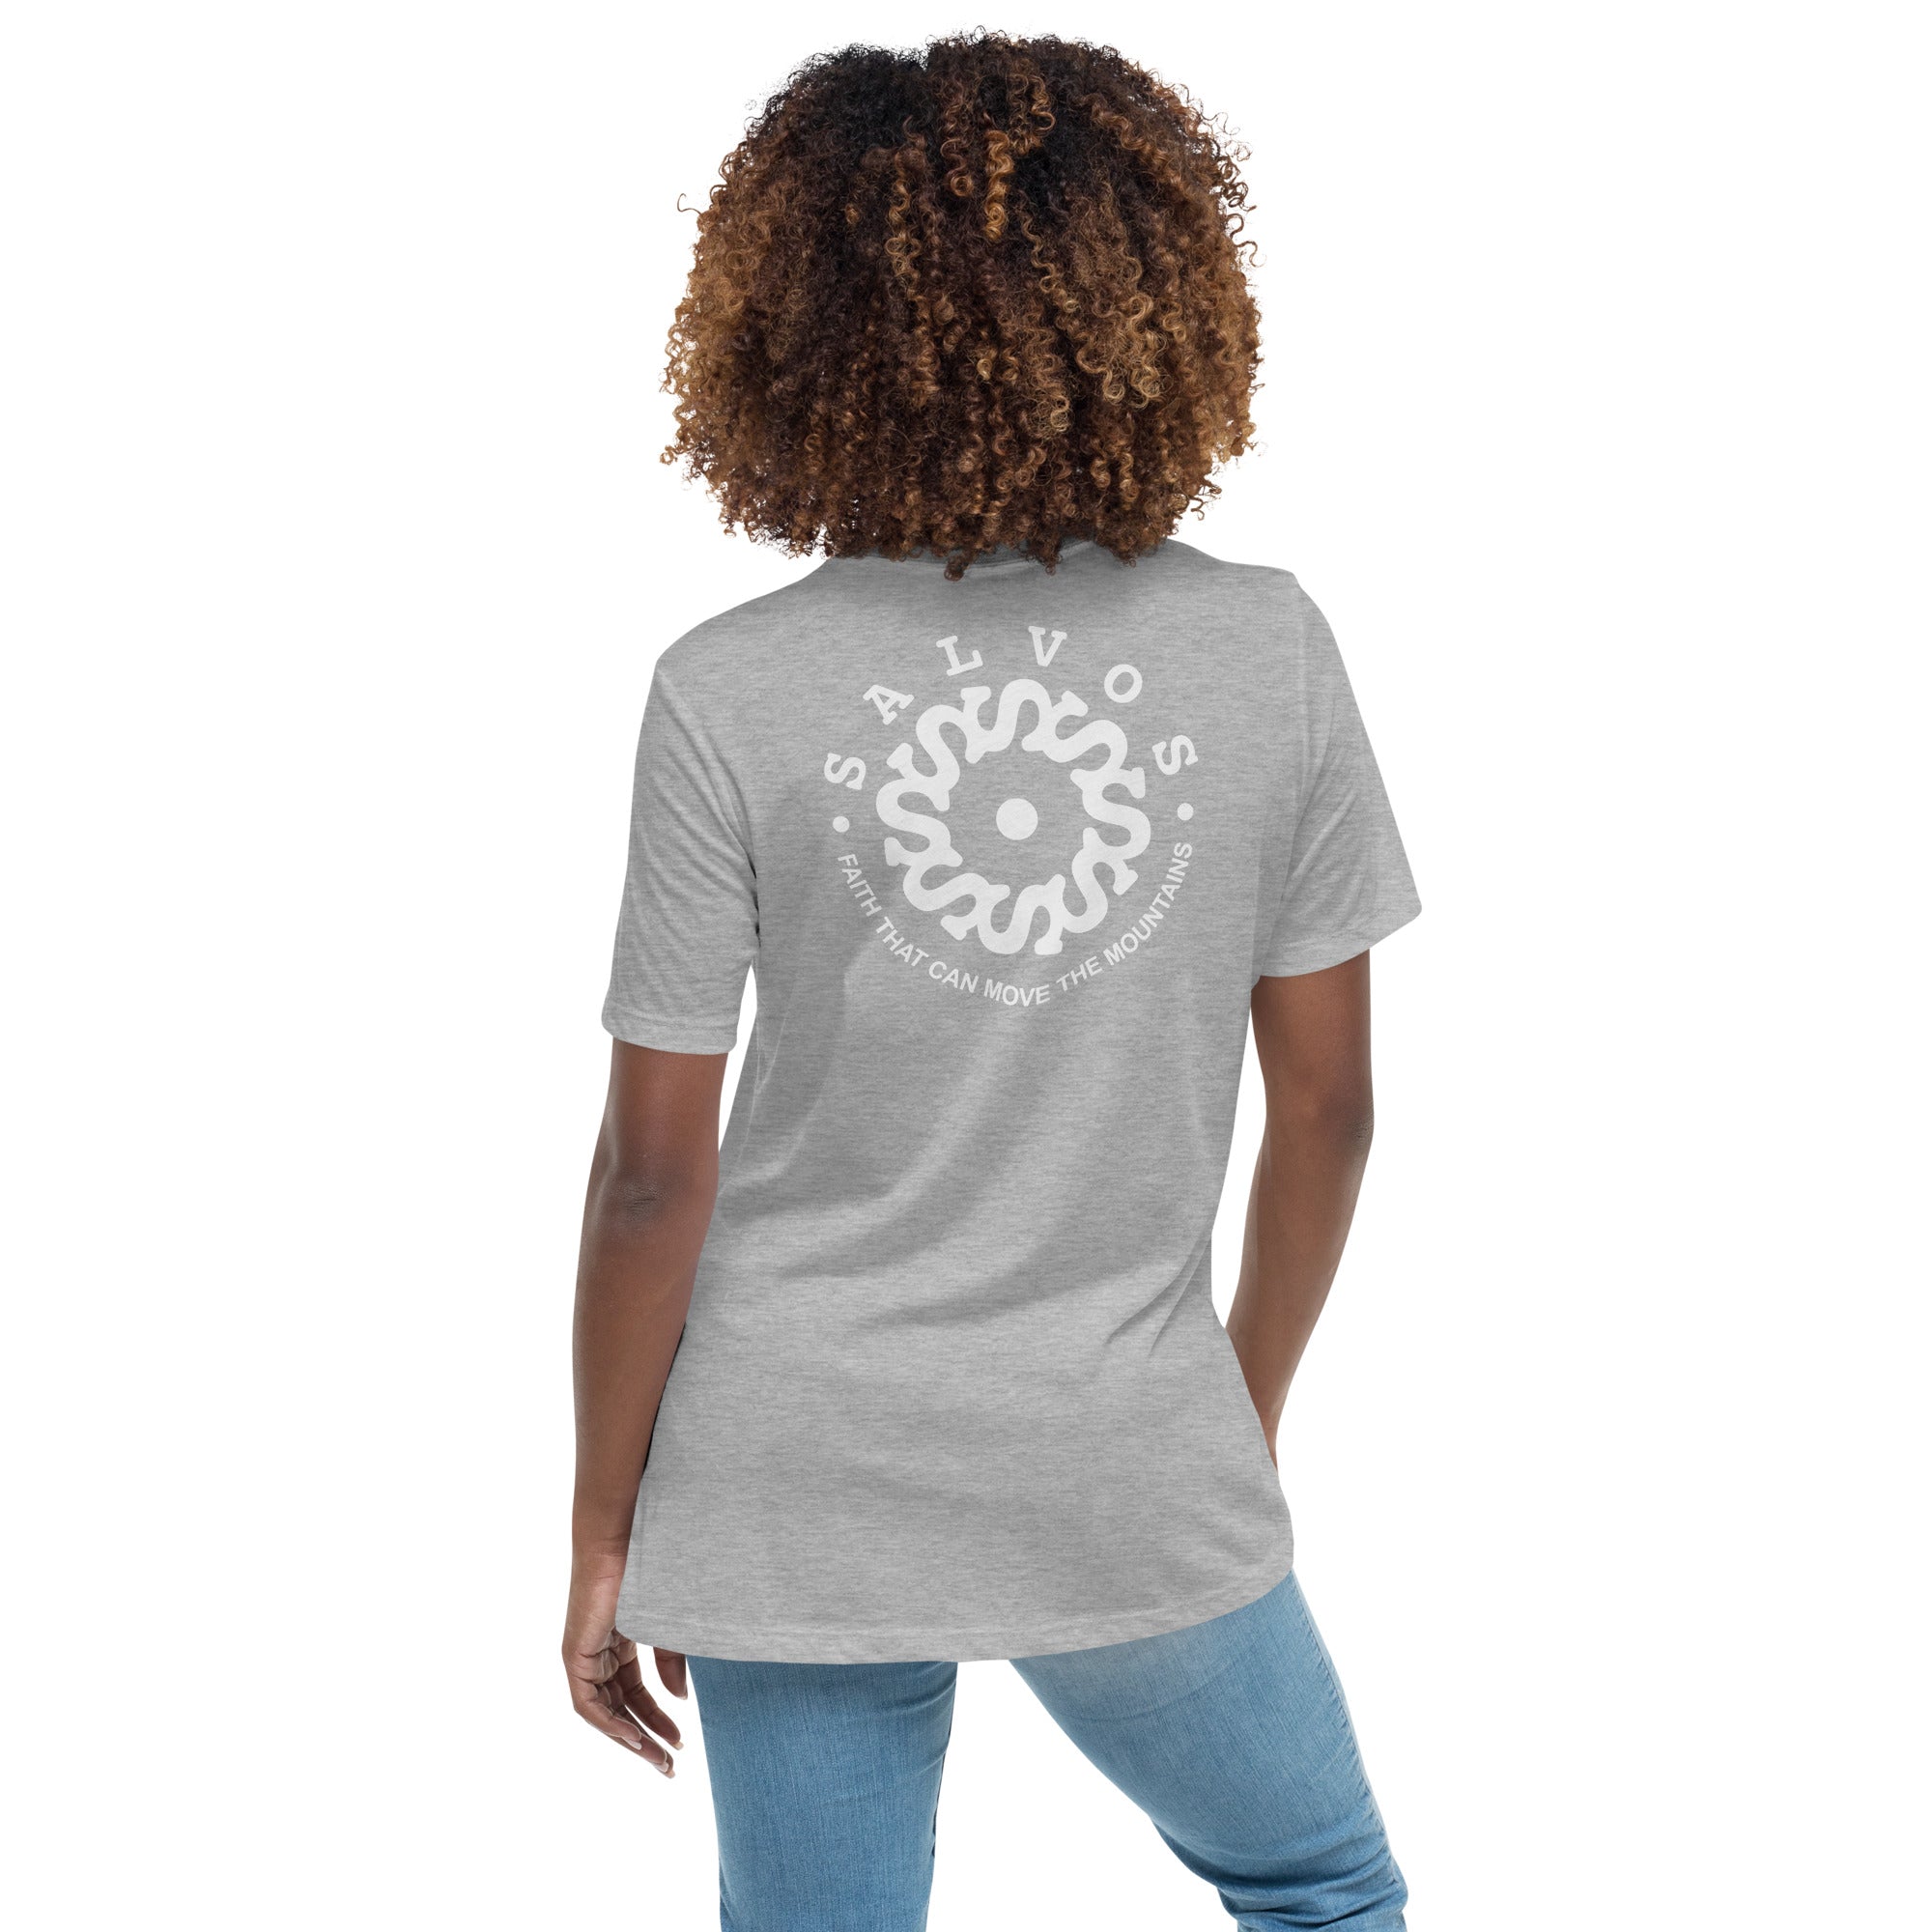 SALVOS FLOWER IN ATHLETIC HEATHER WOMEN RELAXED TEE